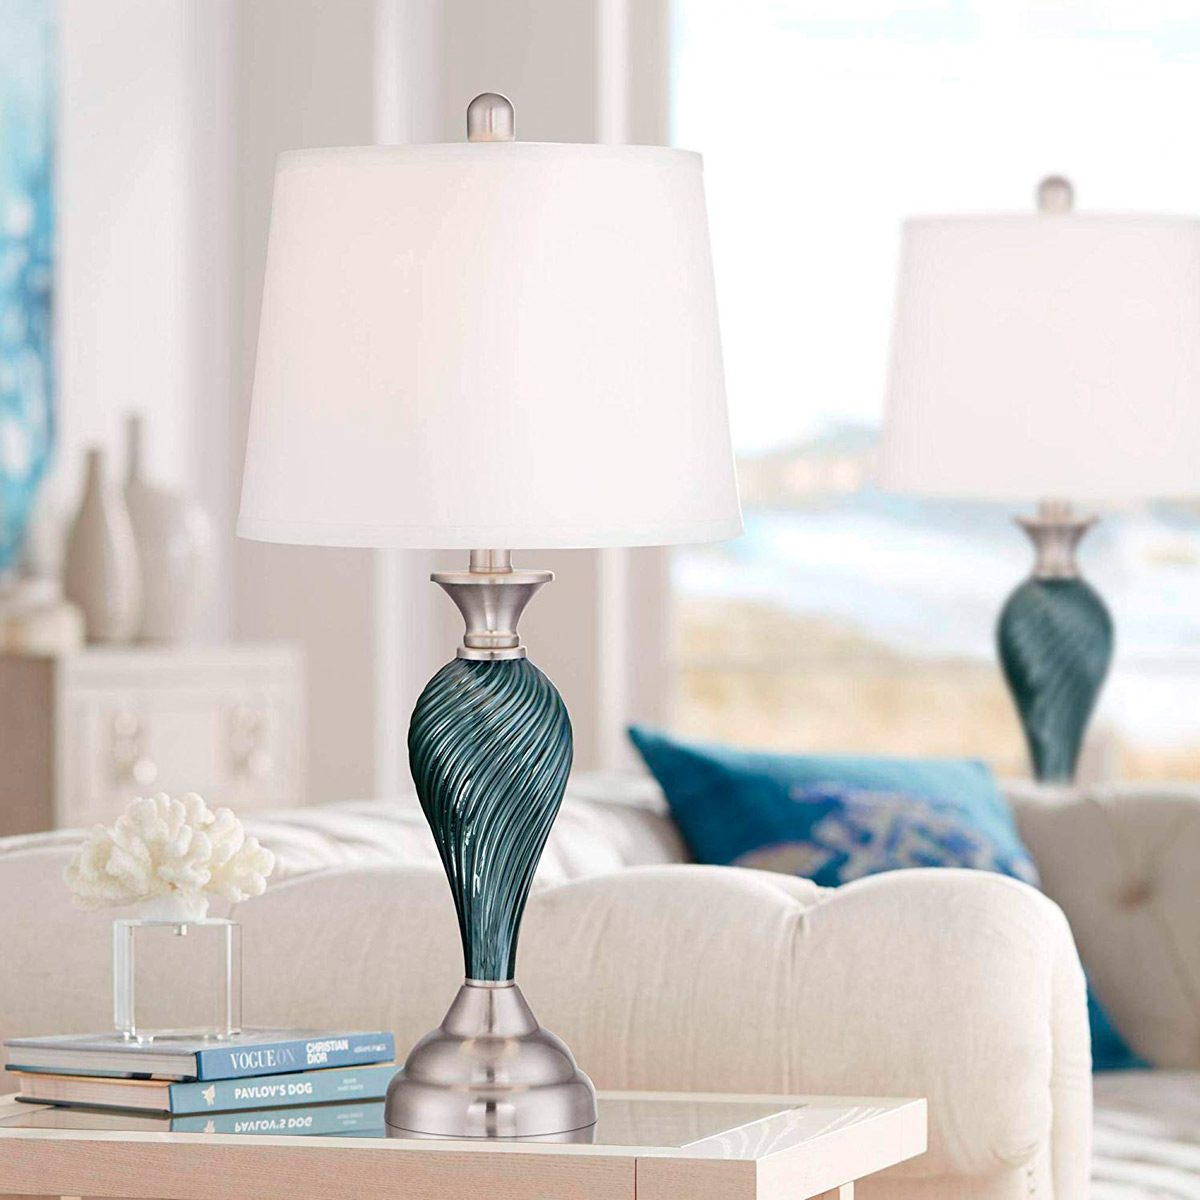 11 Living Room Lighting Ideas We Love for Any Space